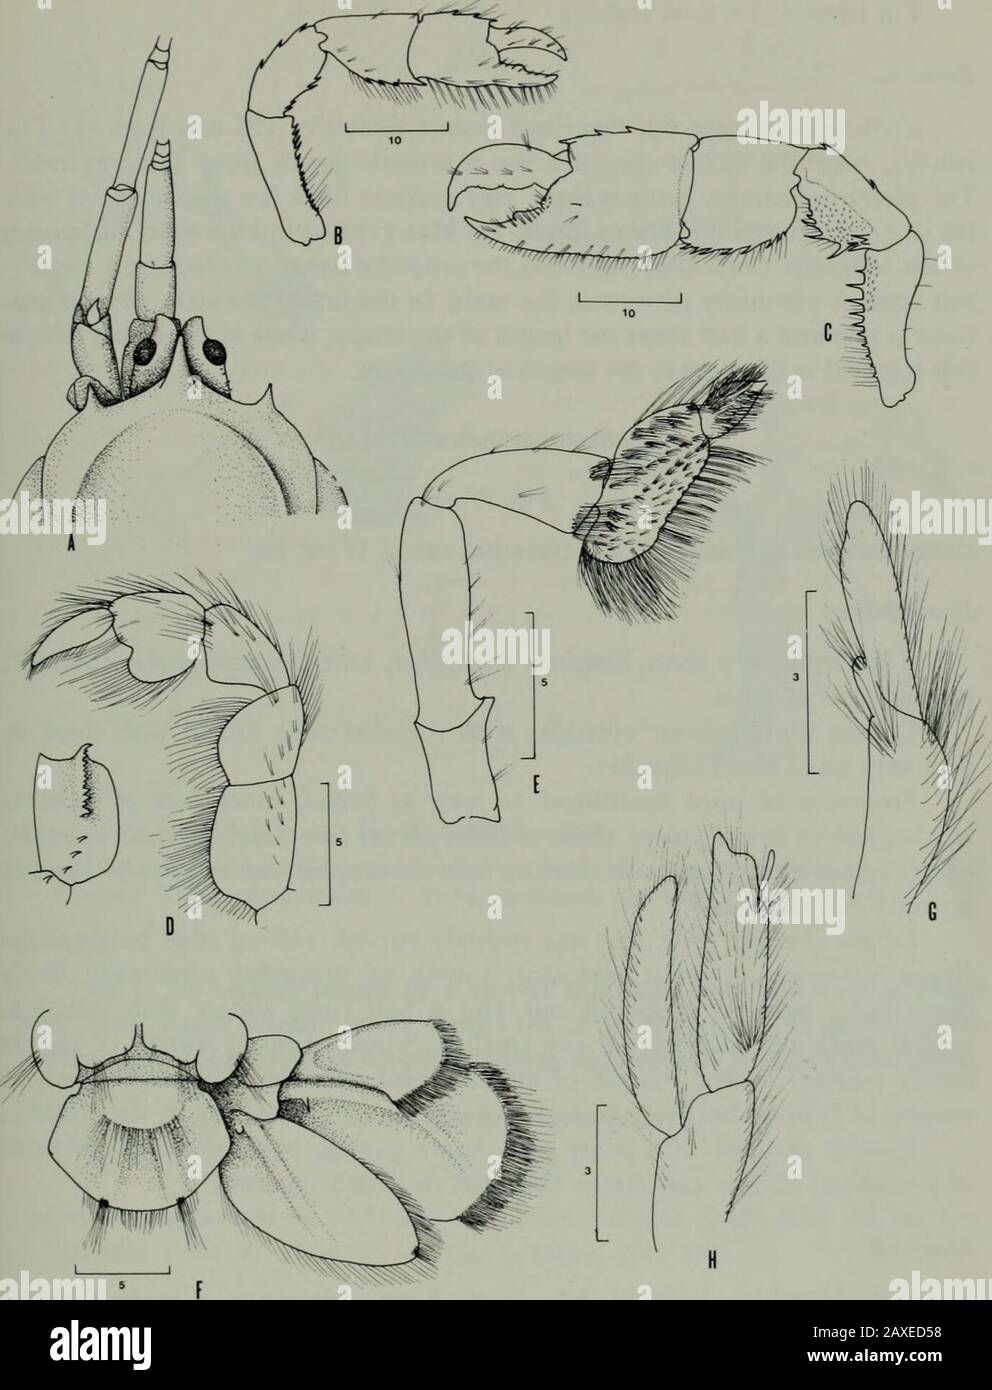 Annals of the South African MuseumAnnale van die Suid-Afrikaanse Museum . asing insize distally. Finger and thumb of smaller chela gaping, cutting edge of finger unarmed,that of thumb with blunt tubercle at about midpoint; upper margin of palmbearing three spines; carpus armed with four spines on ventral margin; merusbearing three spines on dorsal margin, four on ventral margin; ischium withrow of fourteen spines, distal four longer than more proximal spines. Propodus of third pereiopod with posterior lobe not very marked, evenlyrounded. Telson broader than long, with semicircular seta-bearing Stock Photo